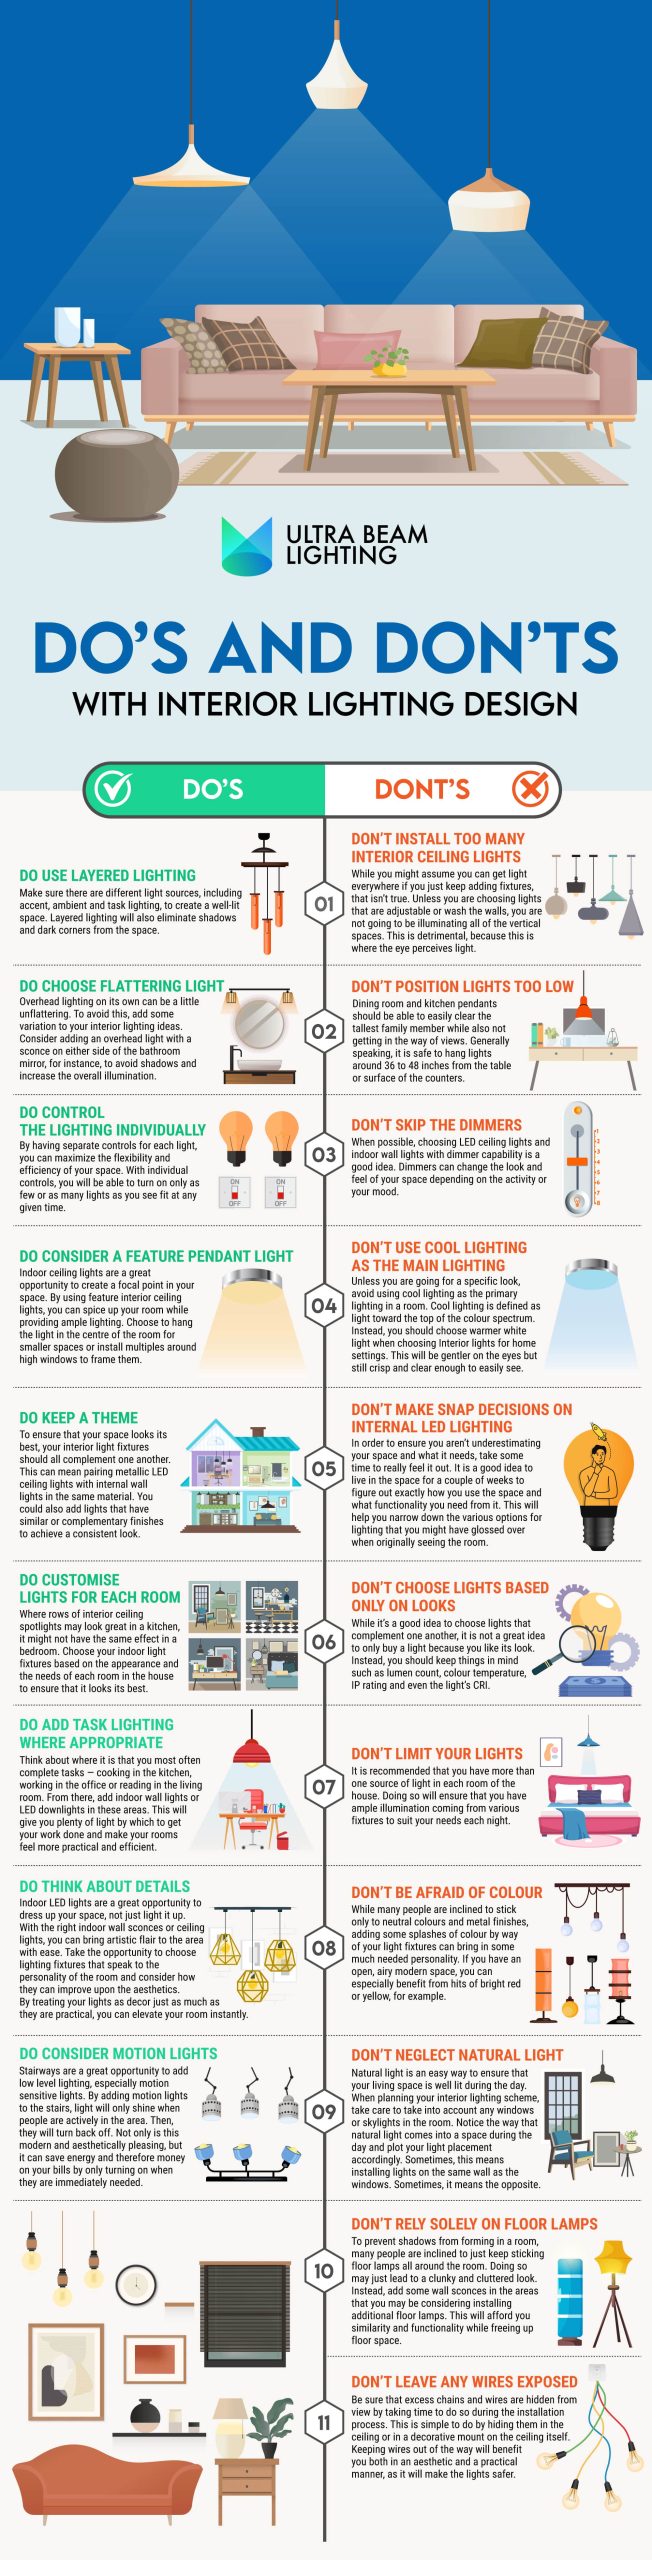 Infographic showing the do's and don'ts with interior lighting design